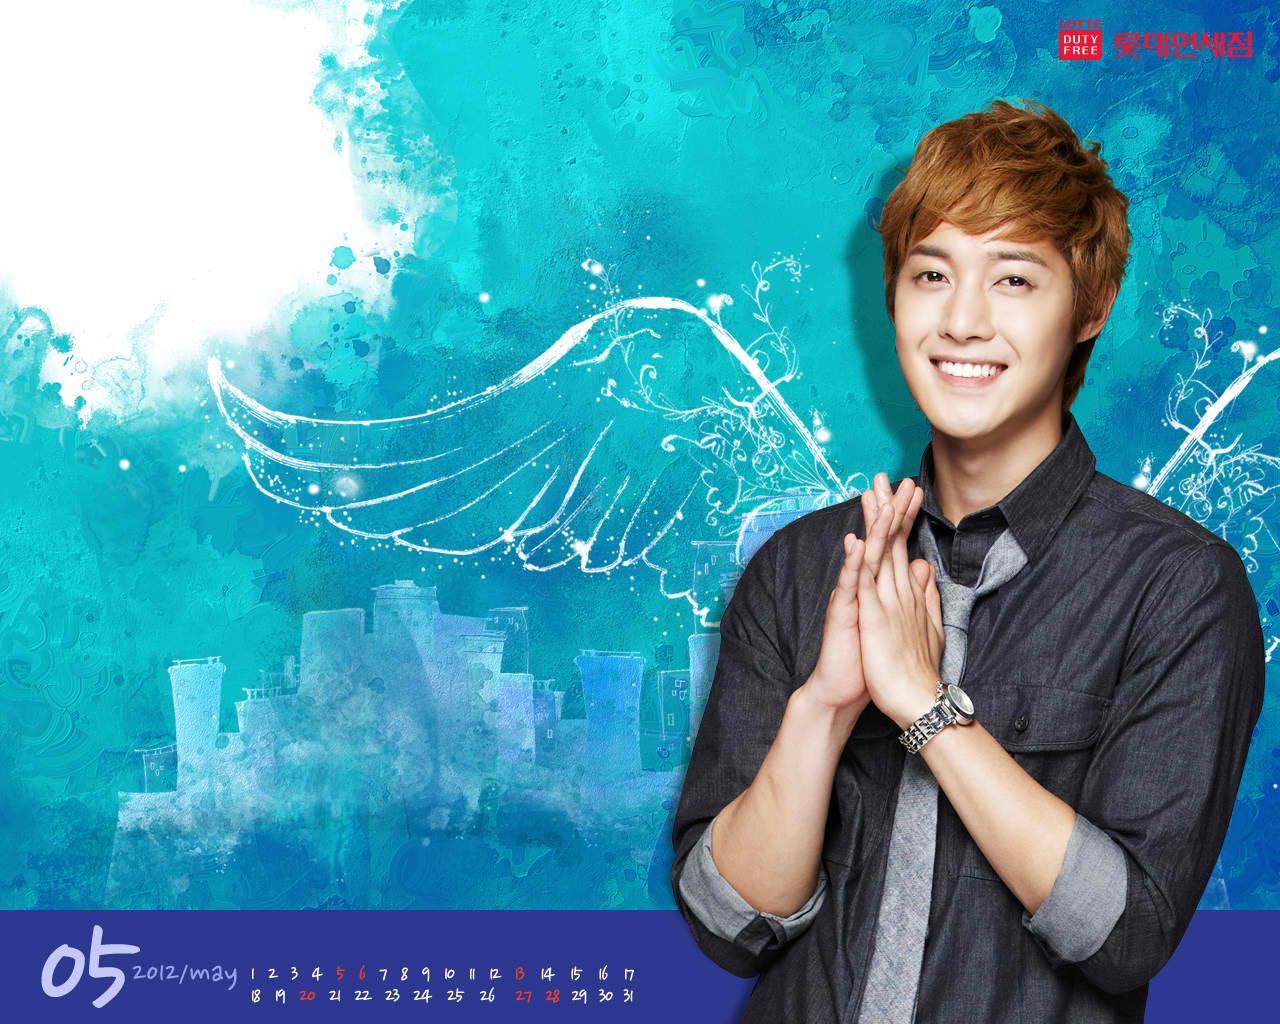 PICTURES Kim Hyun Joong's Lotte Duty Free May 2012 Wallpaper